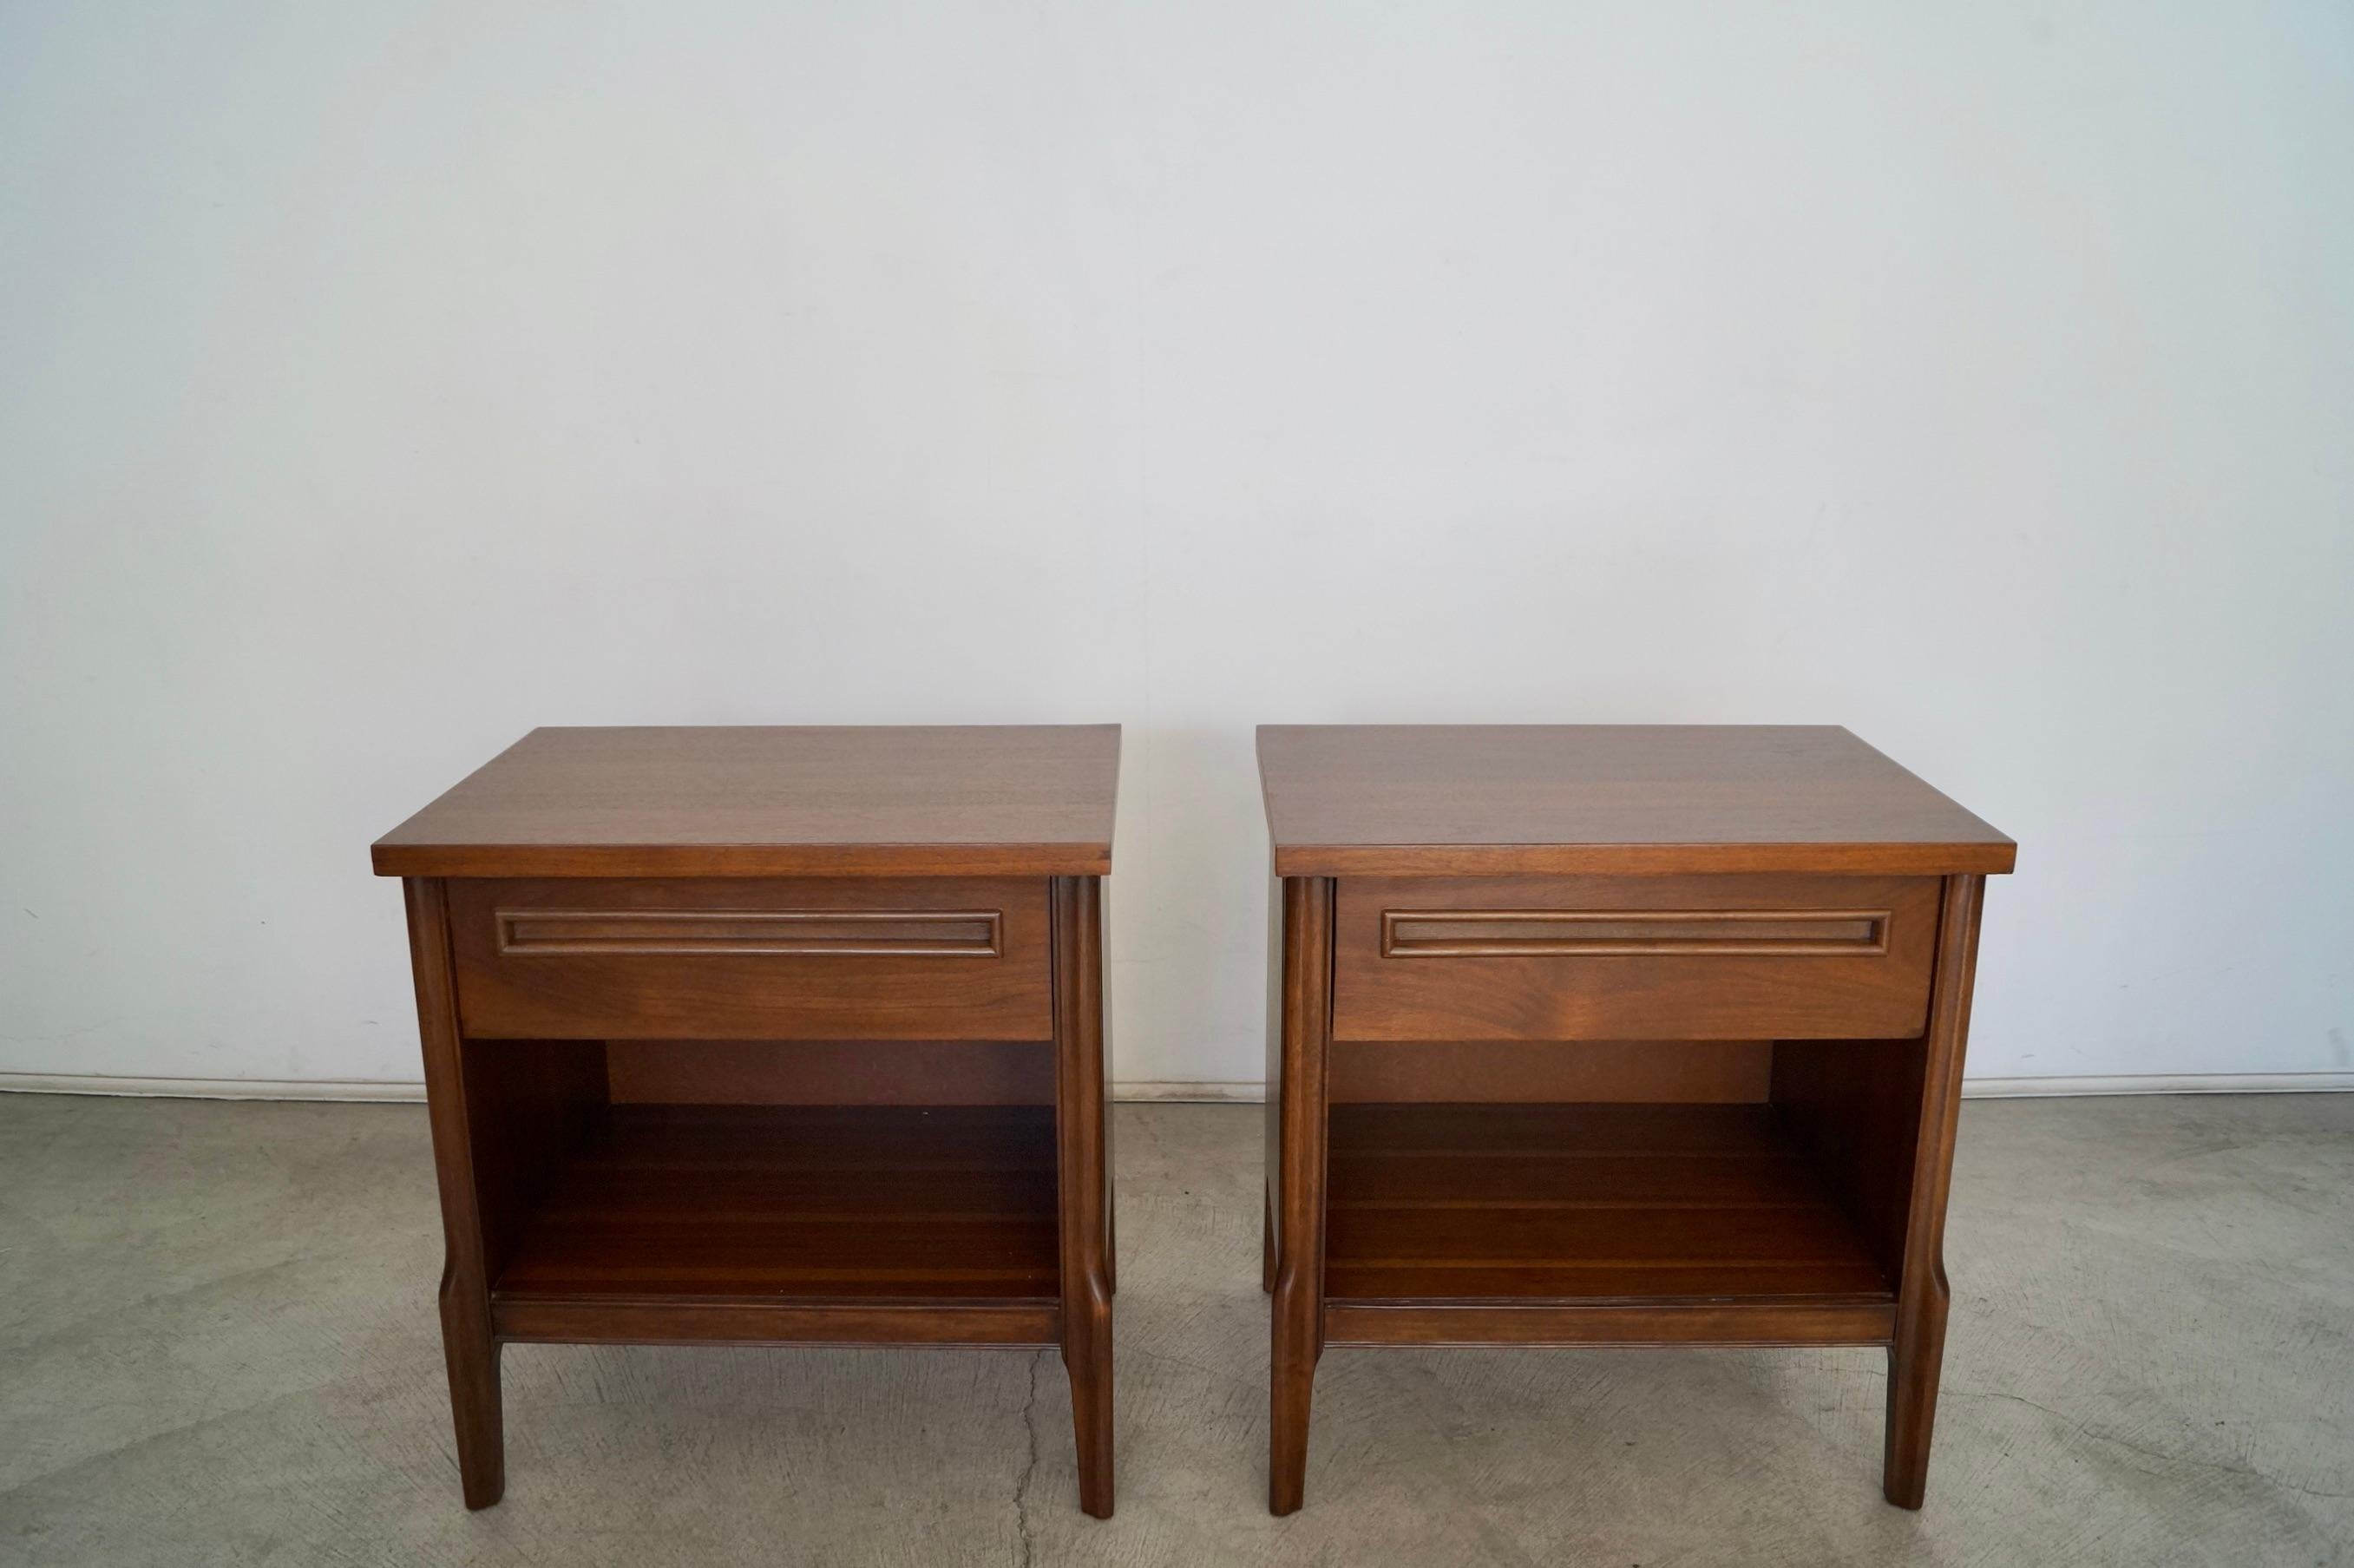 Vintage 1960s Mid-Century Modern pair of night stands for sale. Made of walnut, and have been professionally refinished. They're in excellent condition, and are really well made. They have a Classic and clean design with a recessed handle in the